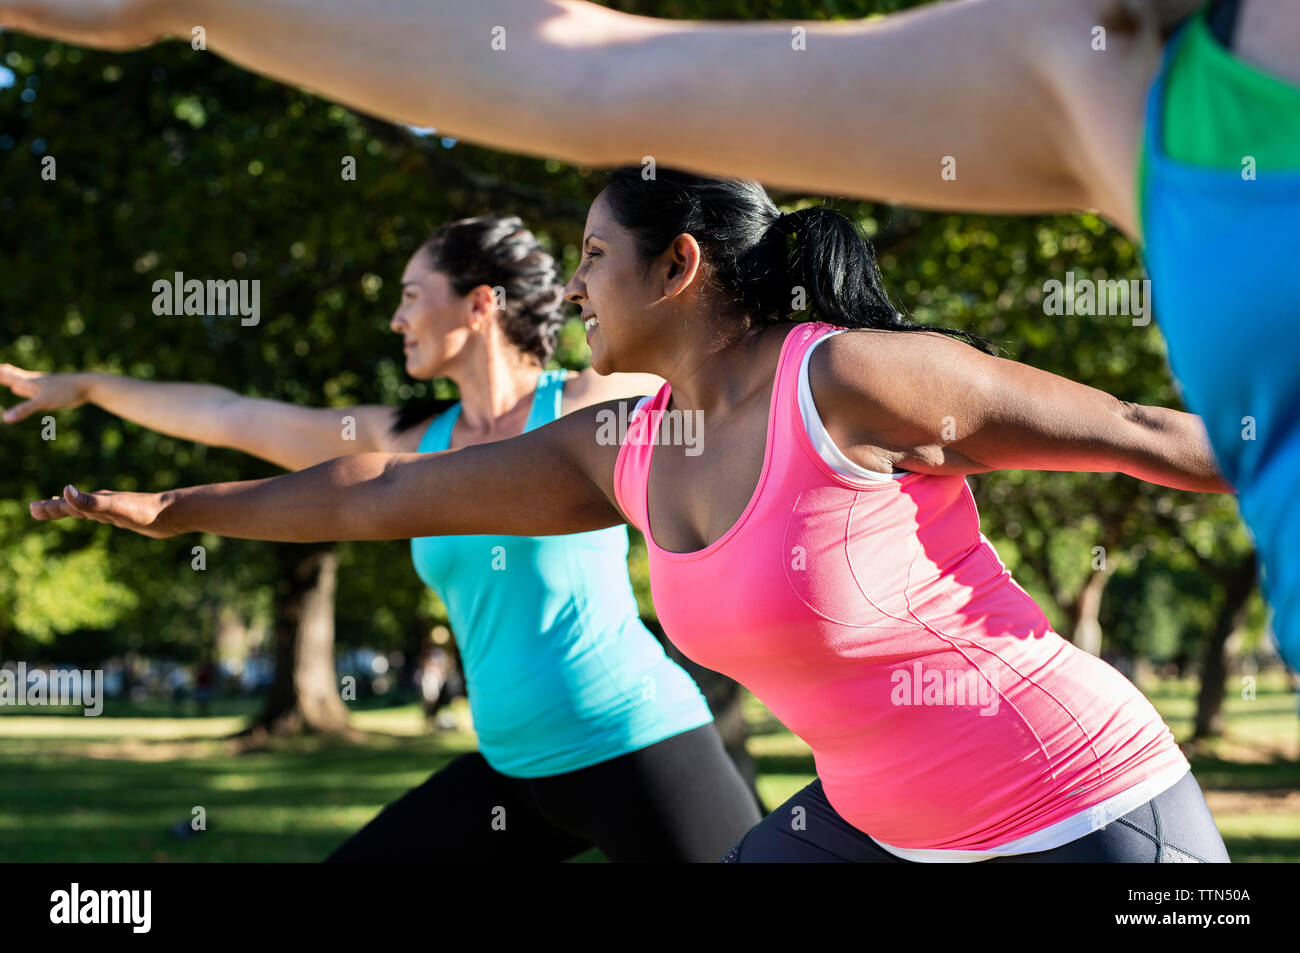 Low angle view of friends with arms outstretched exercising against trees in park Stock Photo